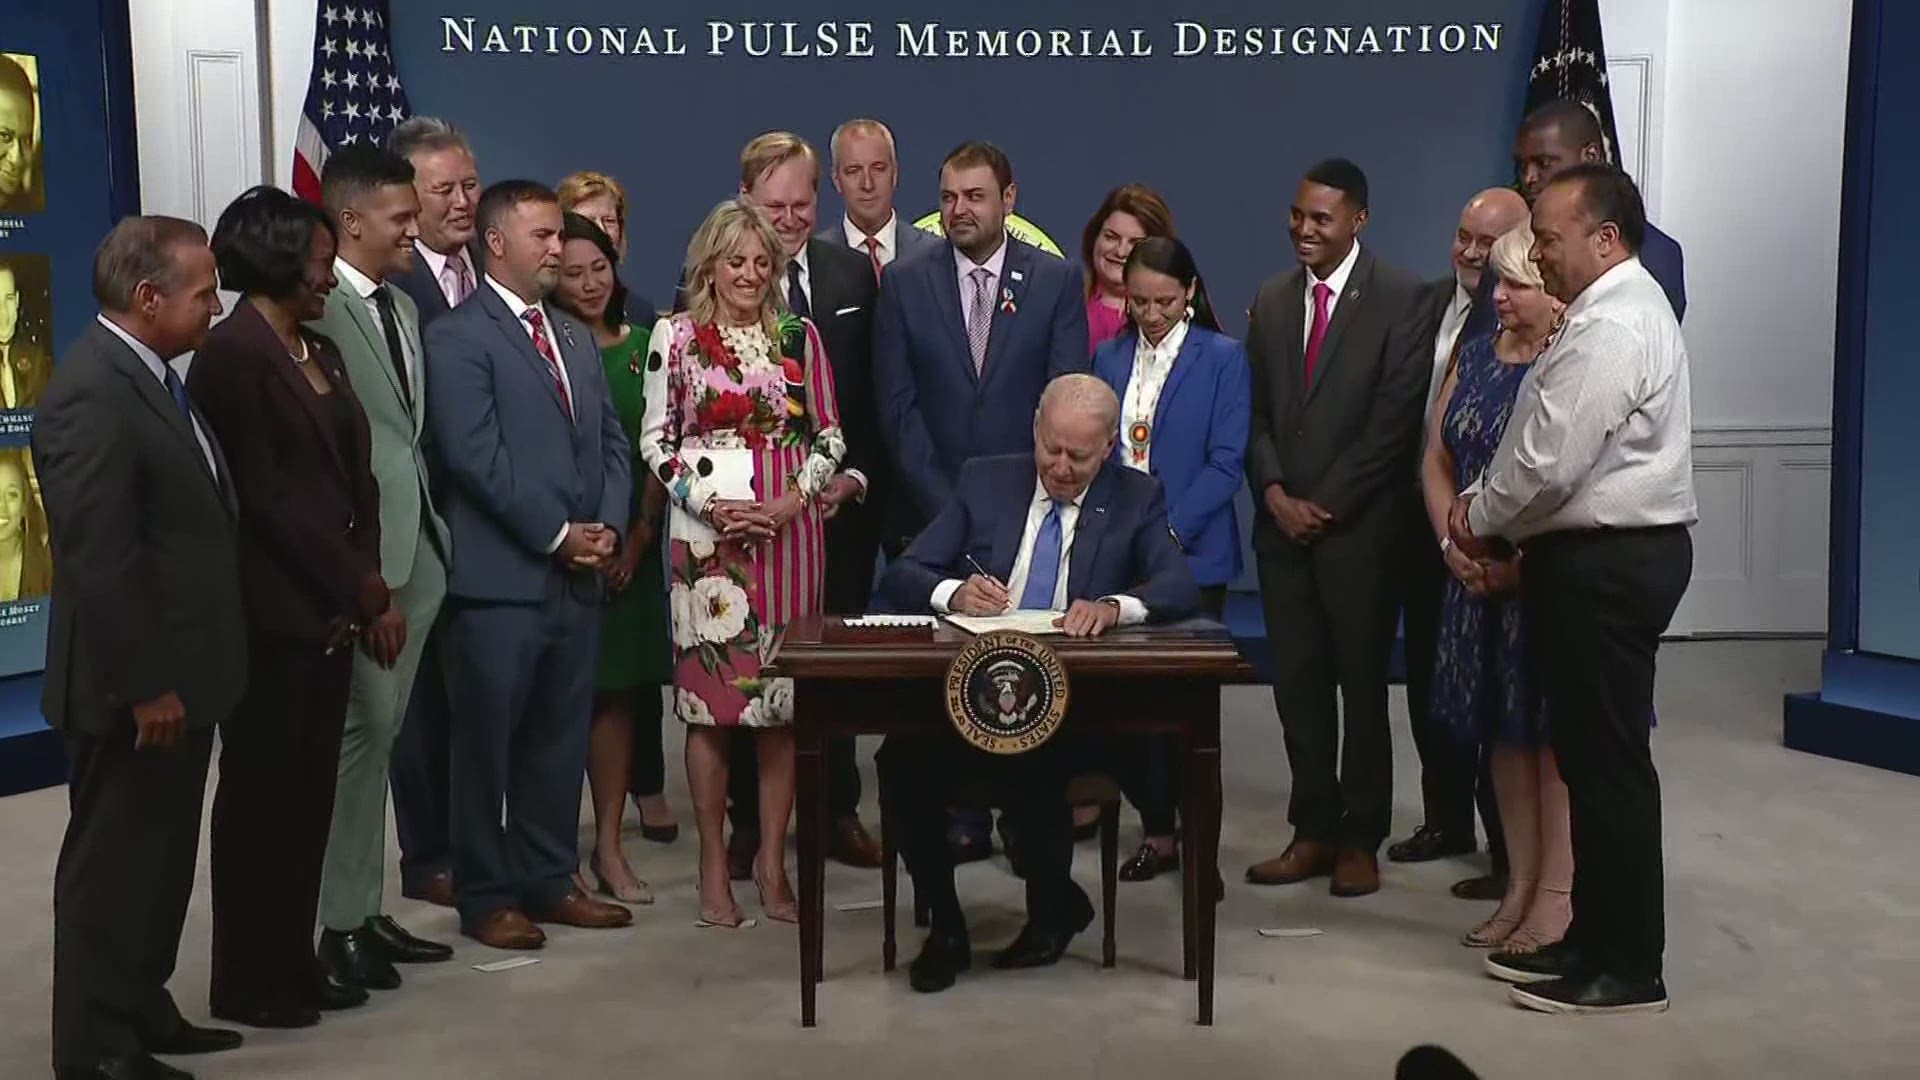 President Joe Biden made Pulse Nightclub a national memorial Friday, to honor the 49 victim and survivors of the 2016 shooting.